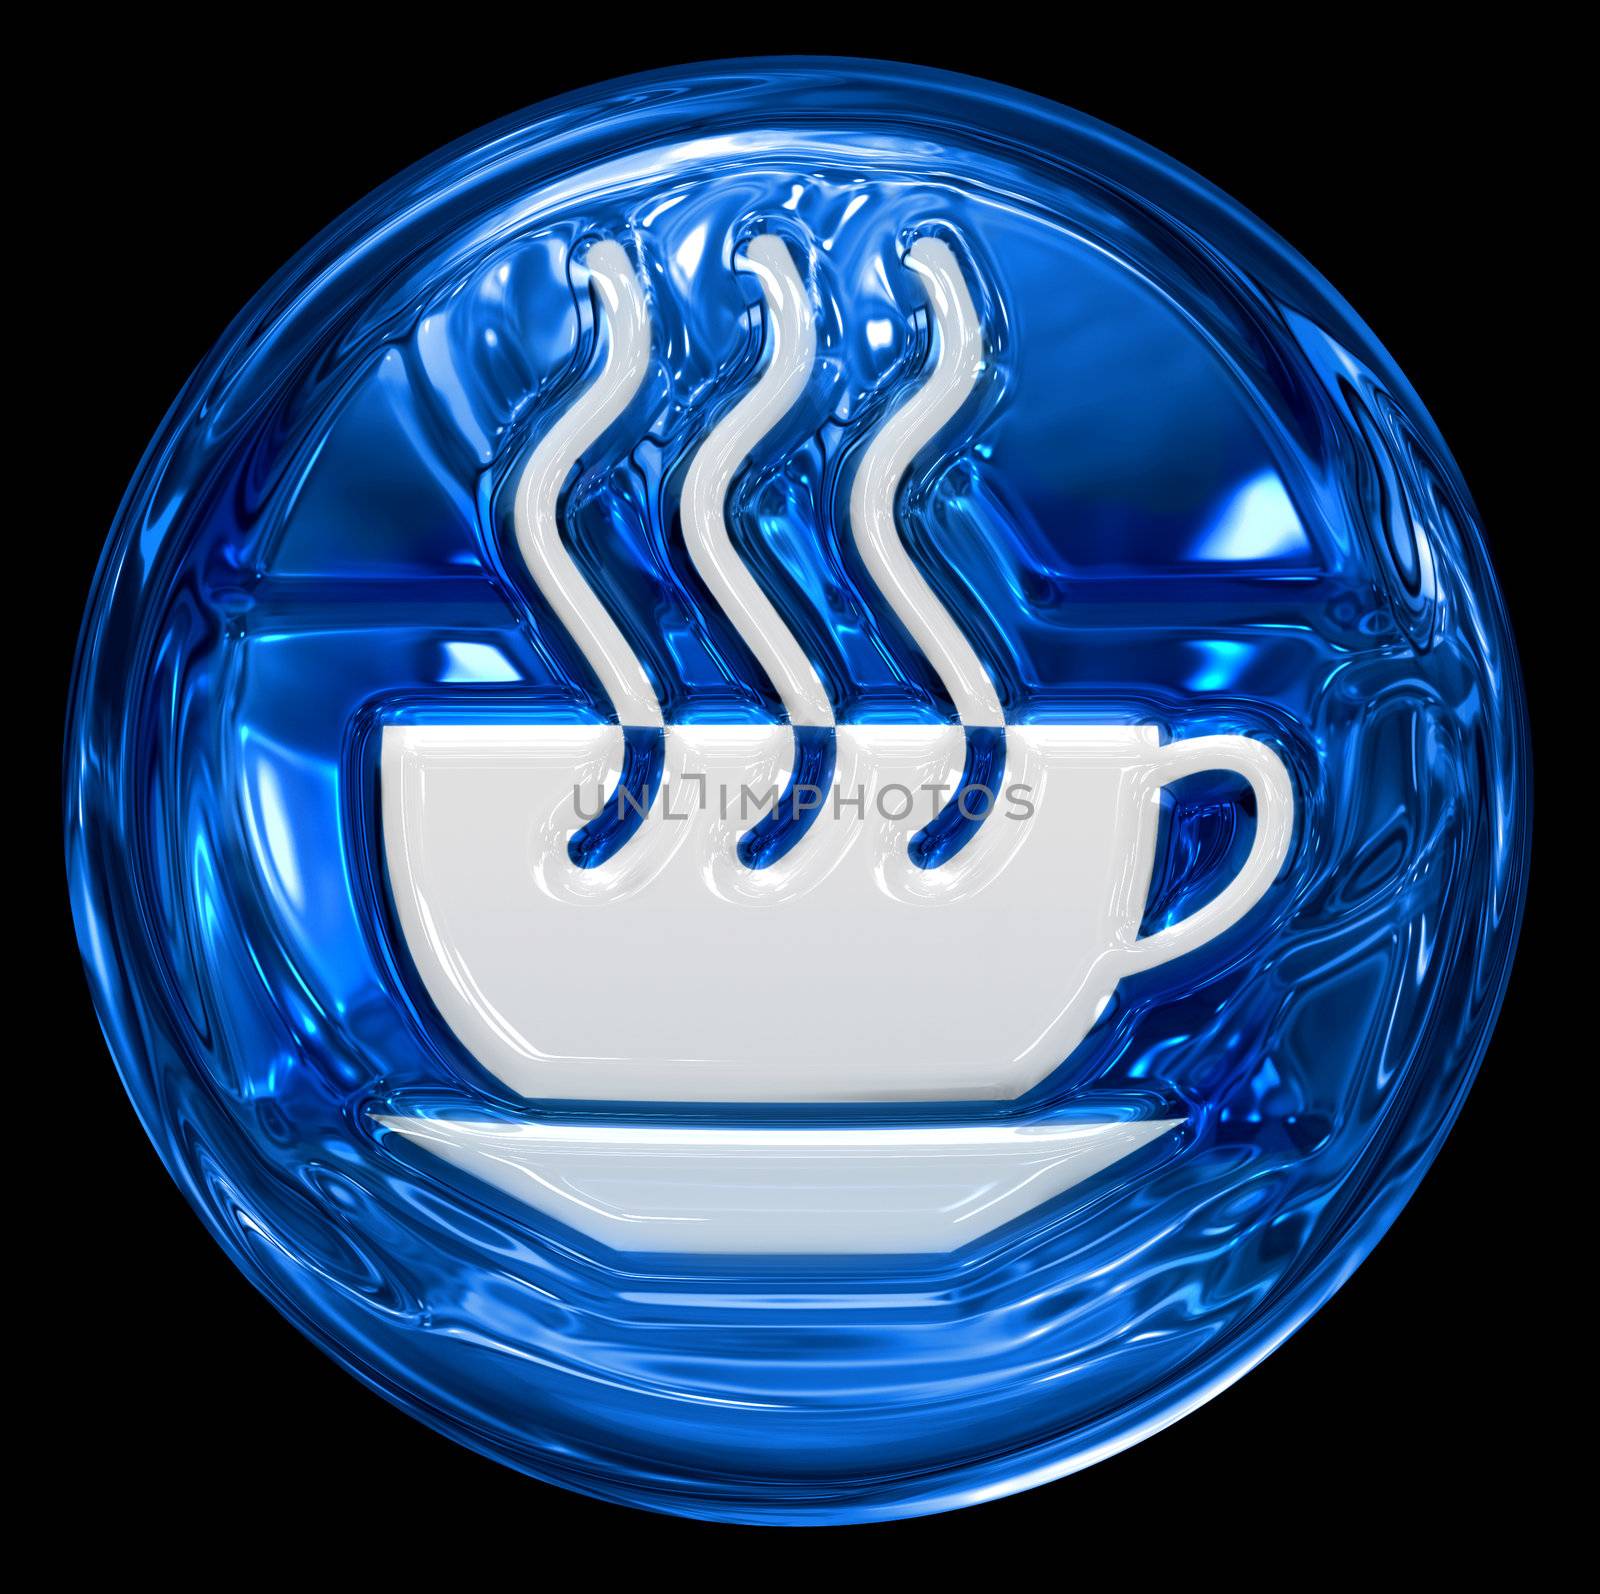 coffee cup icon blue, isolated on black background. by zeffss